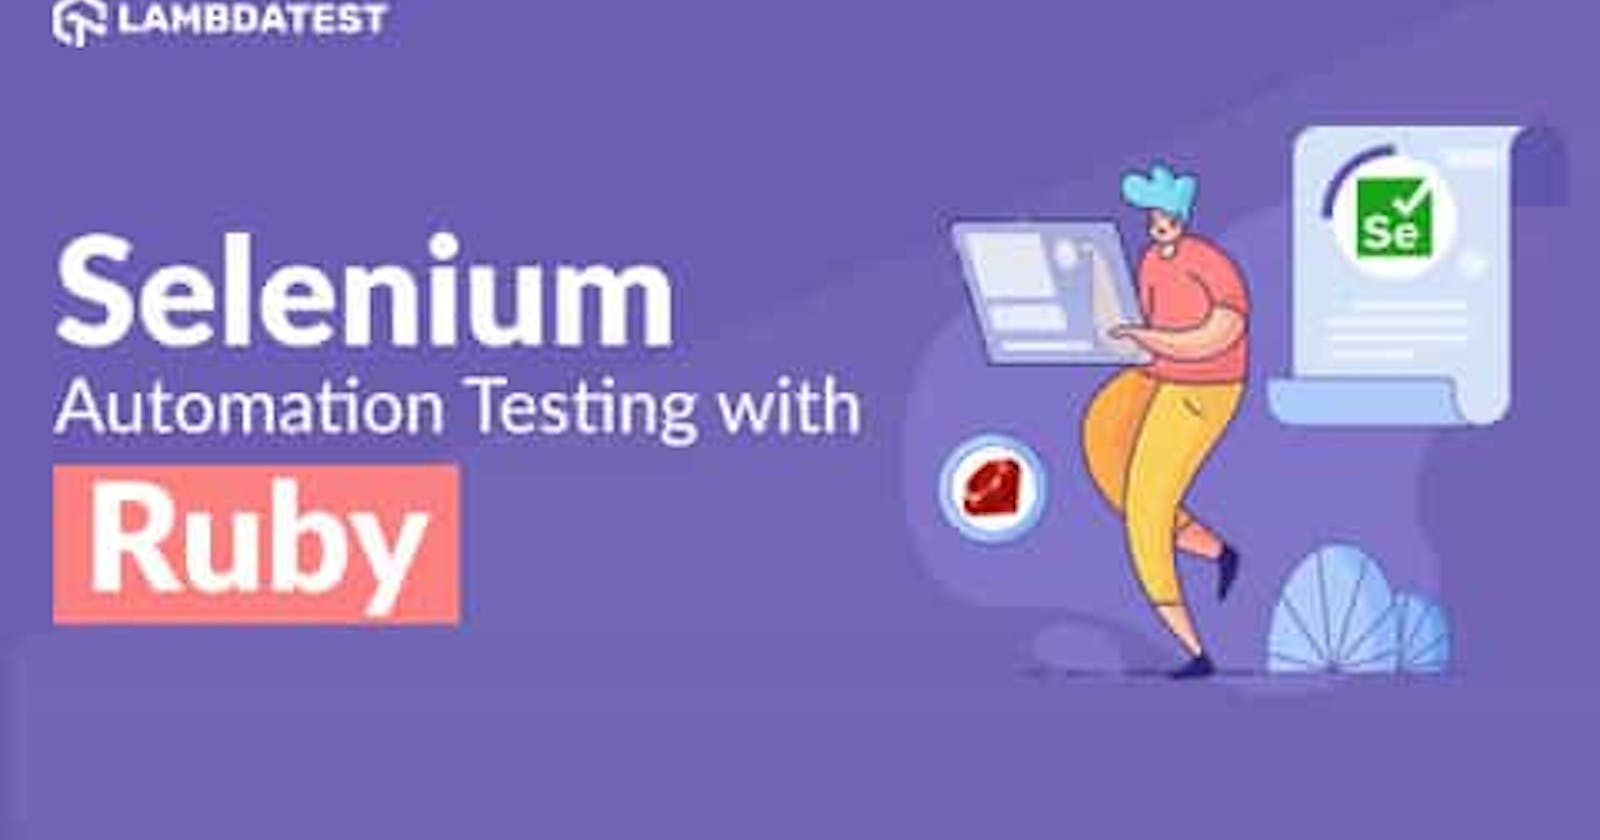 Getting Started With Automation Testing Using Selenium Ruby